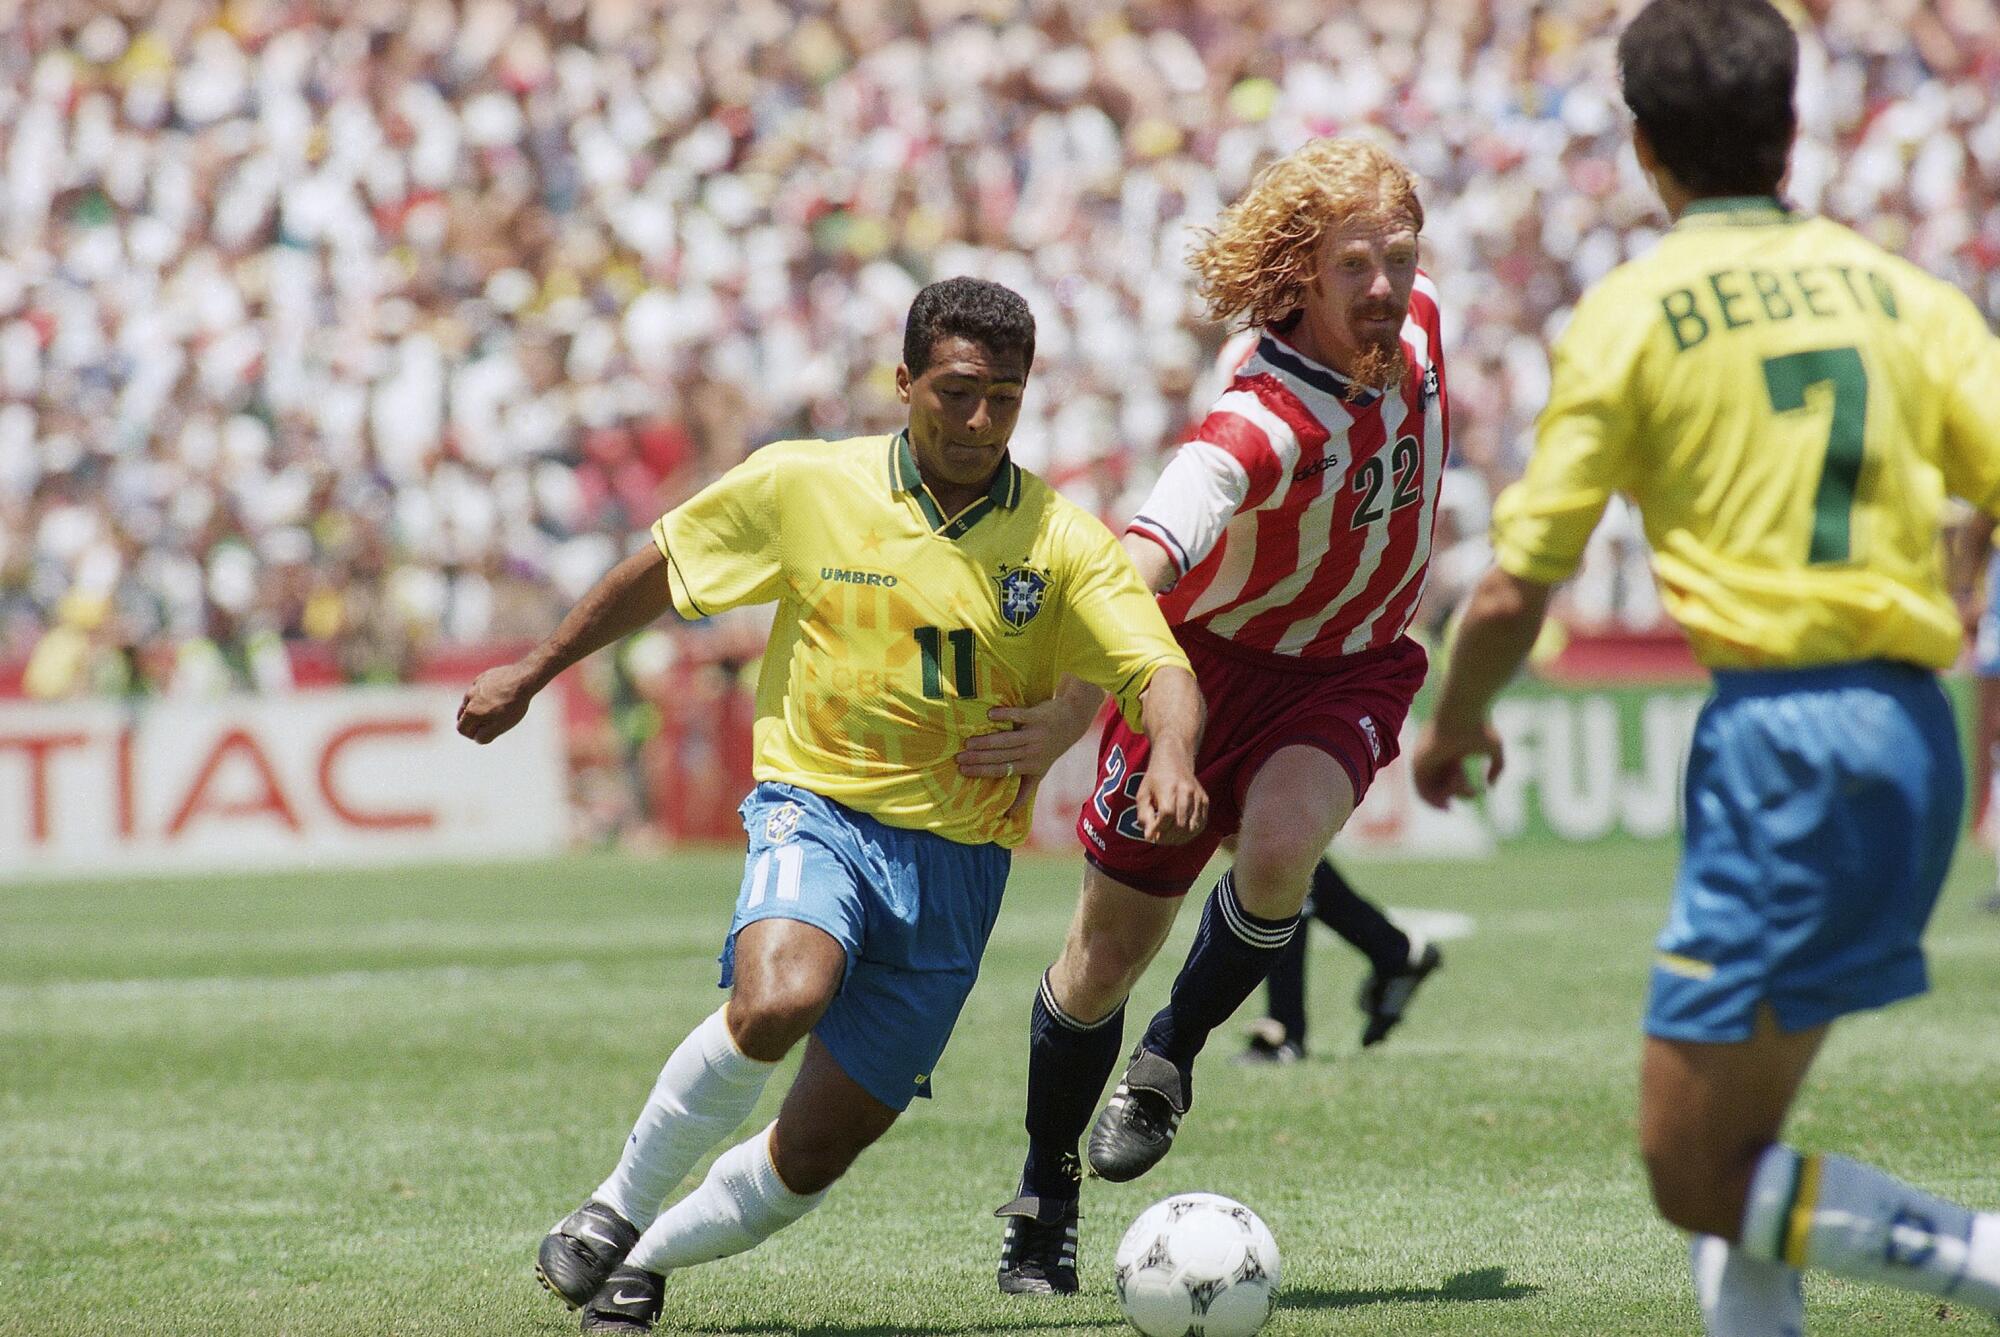 Brazil's Romario, left, battles U.S. defender Alexi Lalas during a World Cup match July 4, 1994, in Palo Alto.